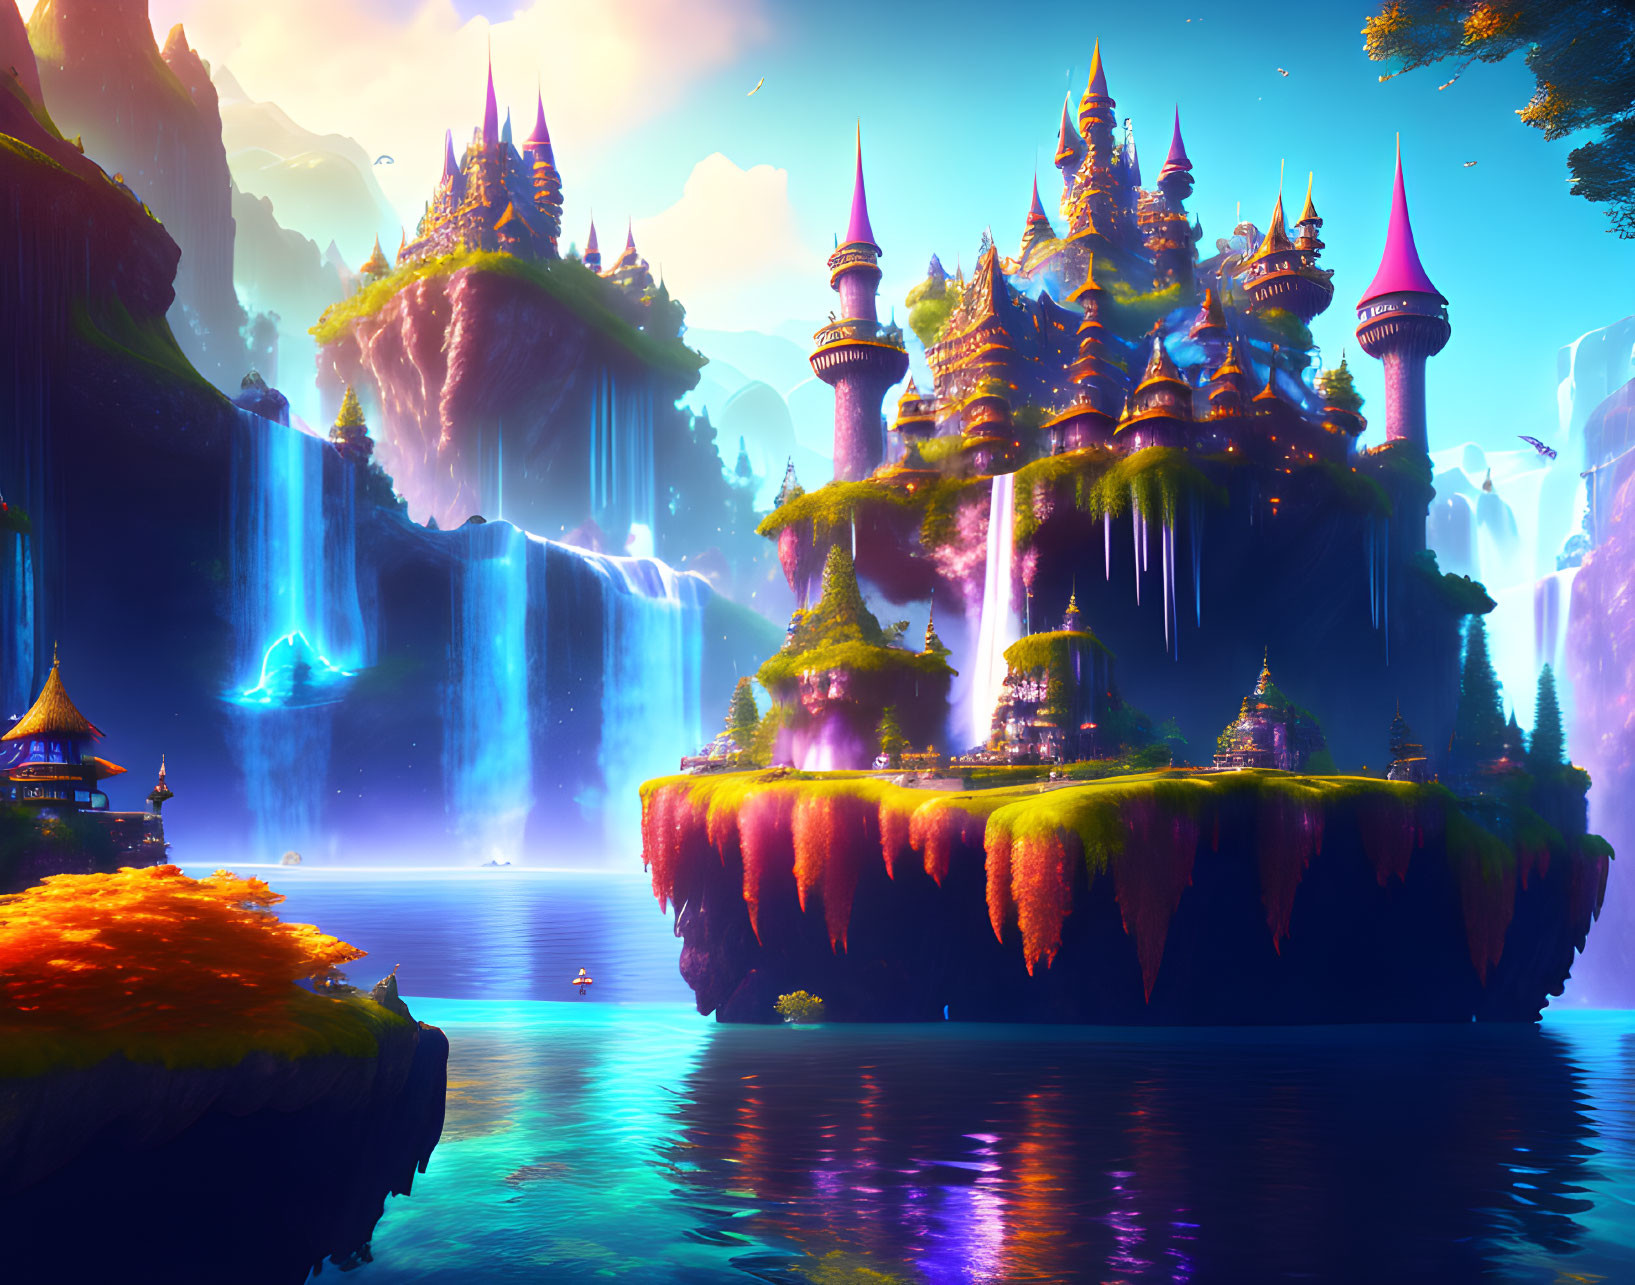 Colorful Fantasy Landscape with Floating Islands, Castles, Waterfalls, and Lake